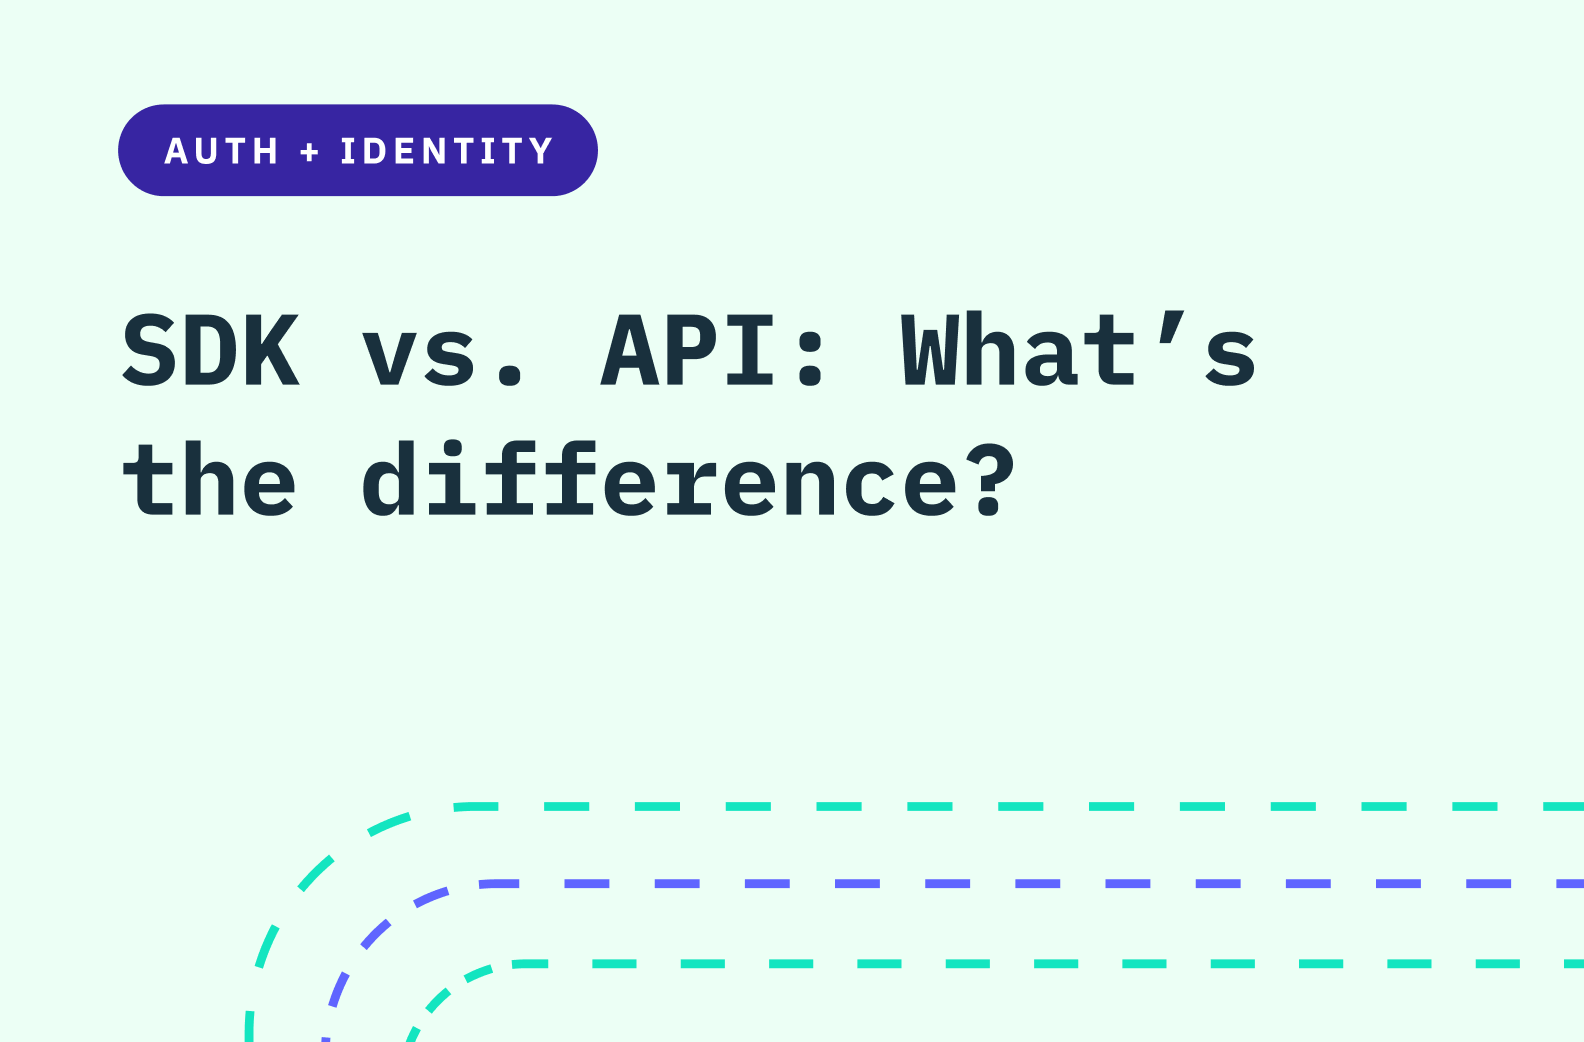 The words "SDK vs. API: What's the difference?" over a mint green background